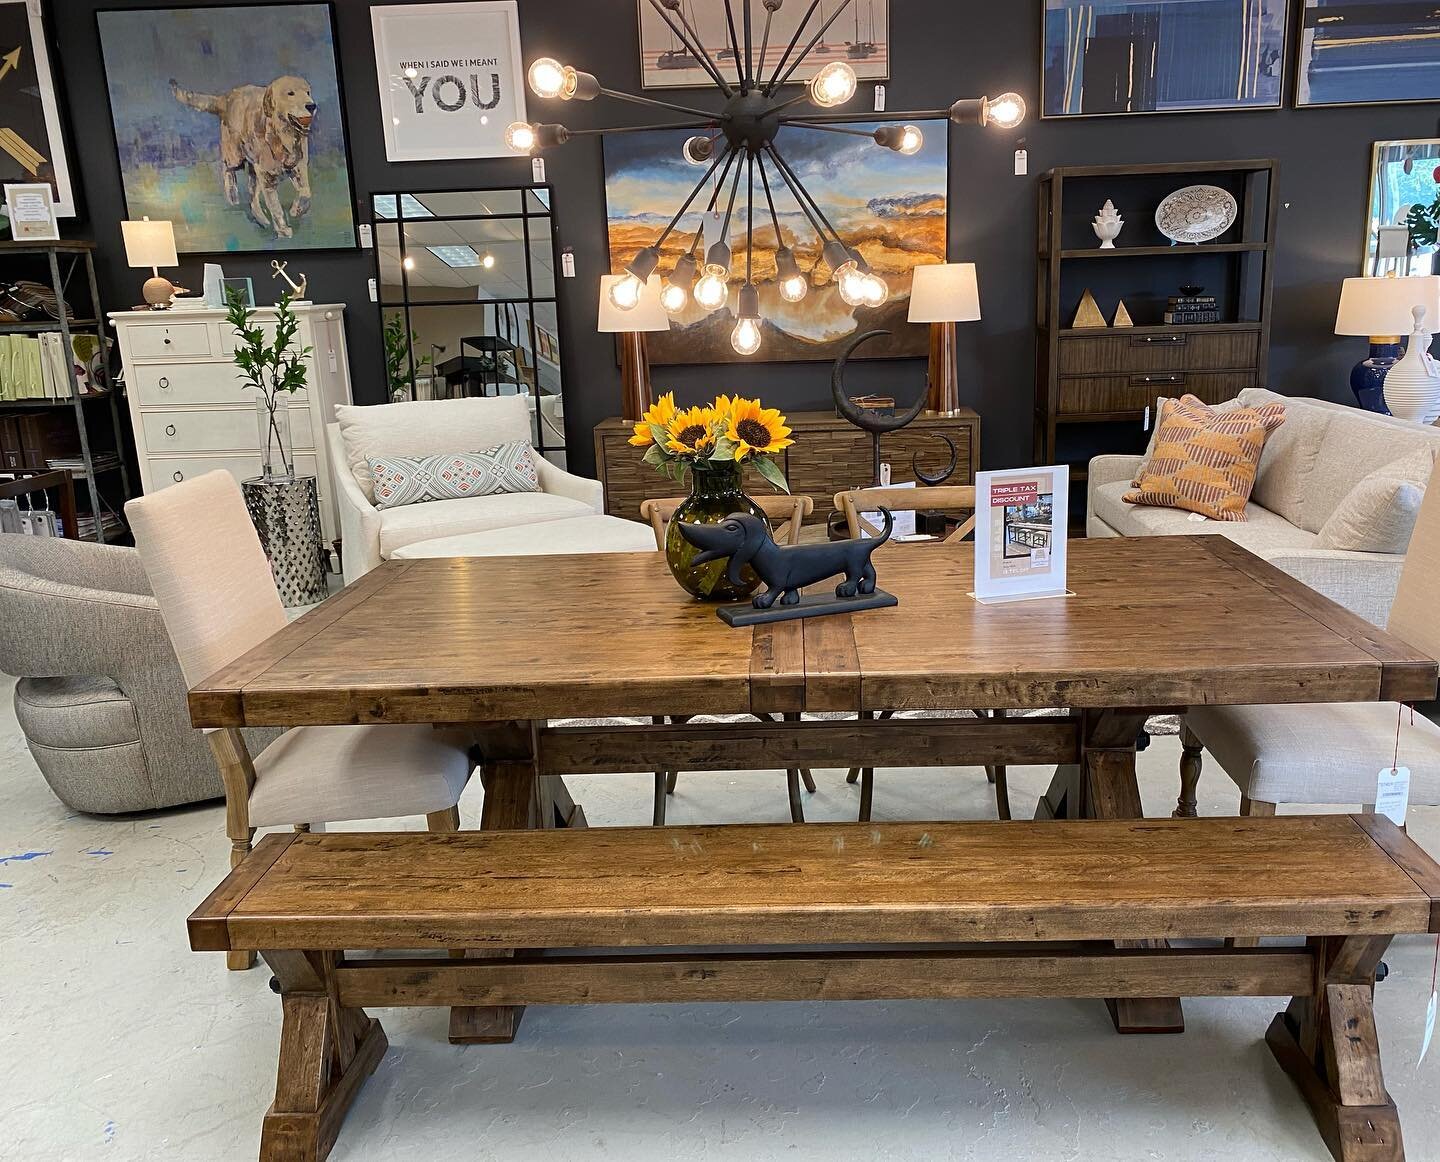 Who&rsquo;s ready for an upgrade to family dinner nights? 🌻

#darbyroadhome #familydinner #newhome #furniture #familytime #feedme